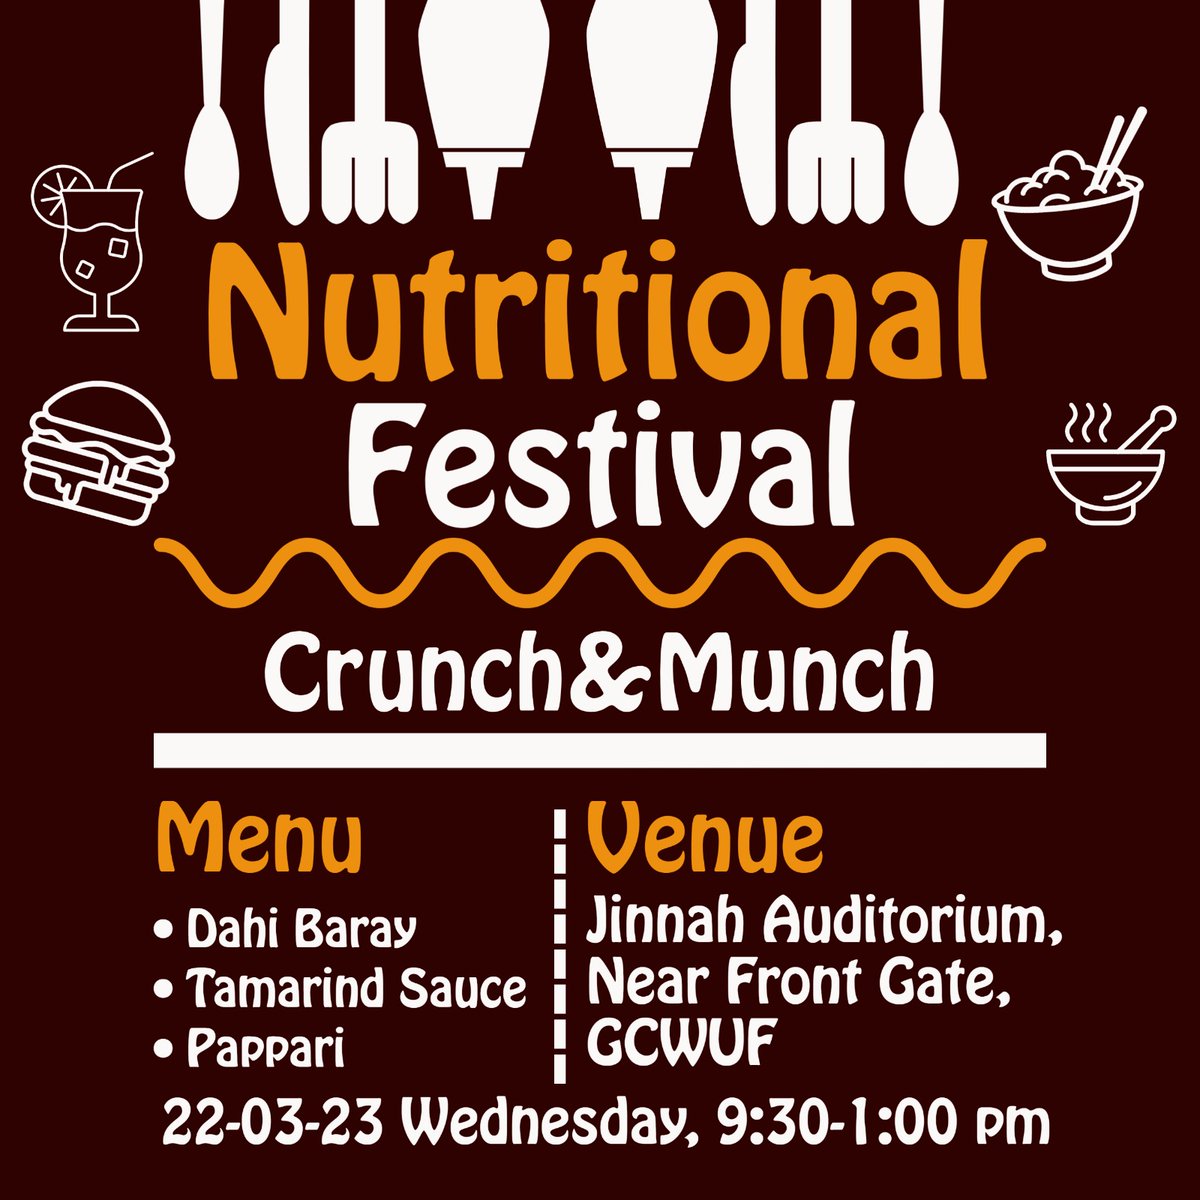 Come and Join us to enjoy The Crisp of Life😋
#nutritionalscience
#nutritionalfestival 
#gcwuf